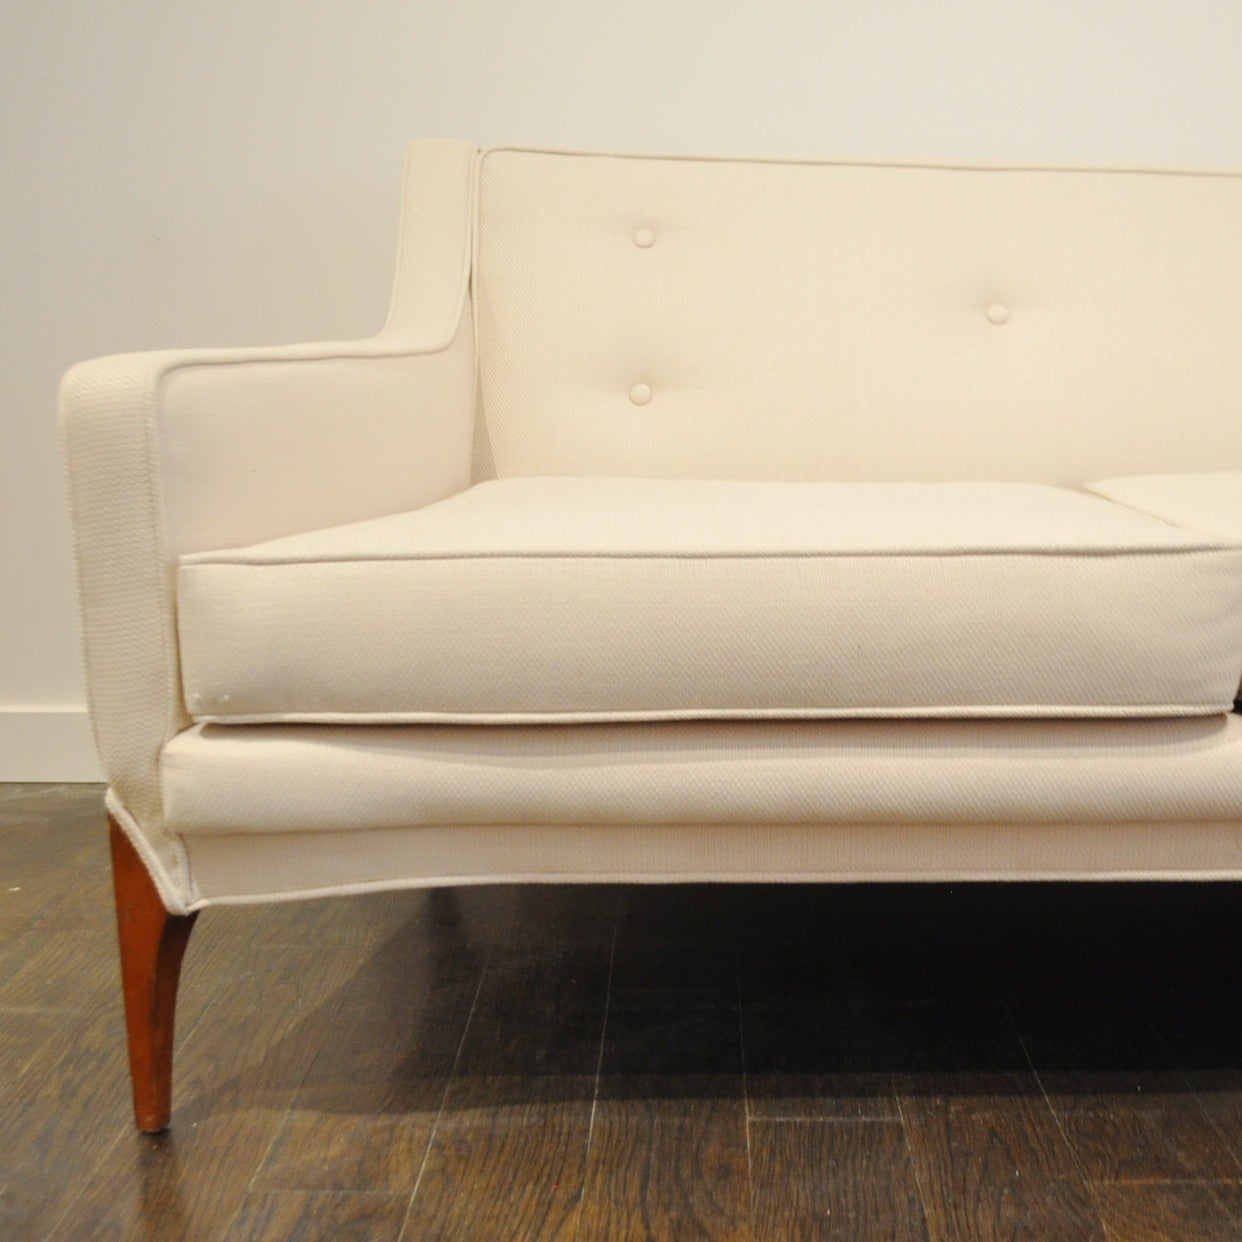 Beautiful example of a 60's era Hollywood Regency 3 seat sofa in newly reupholstered ivory linen.